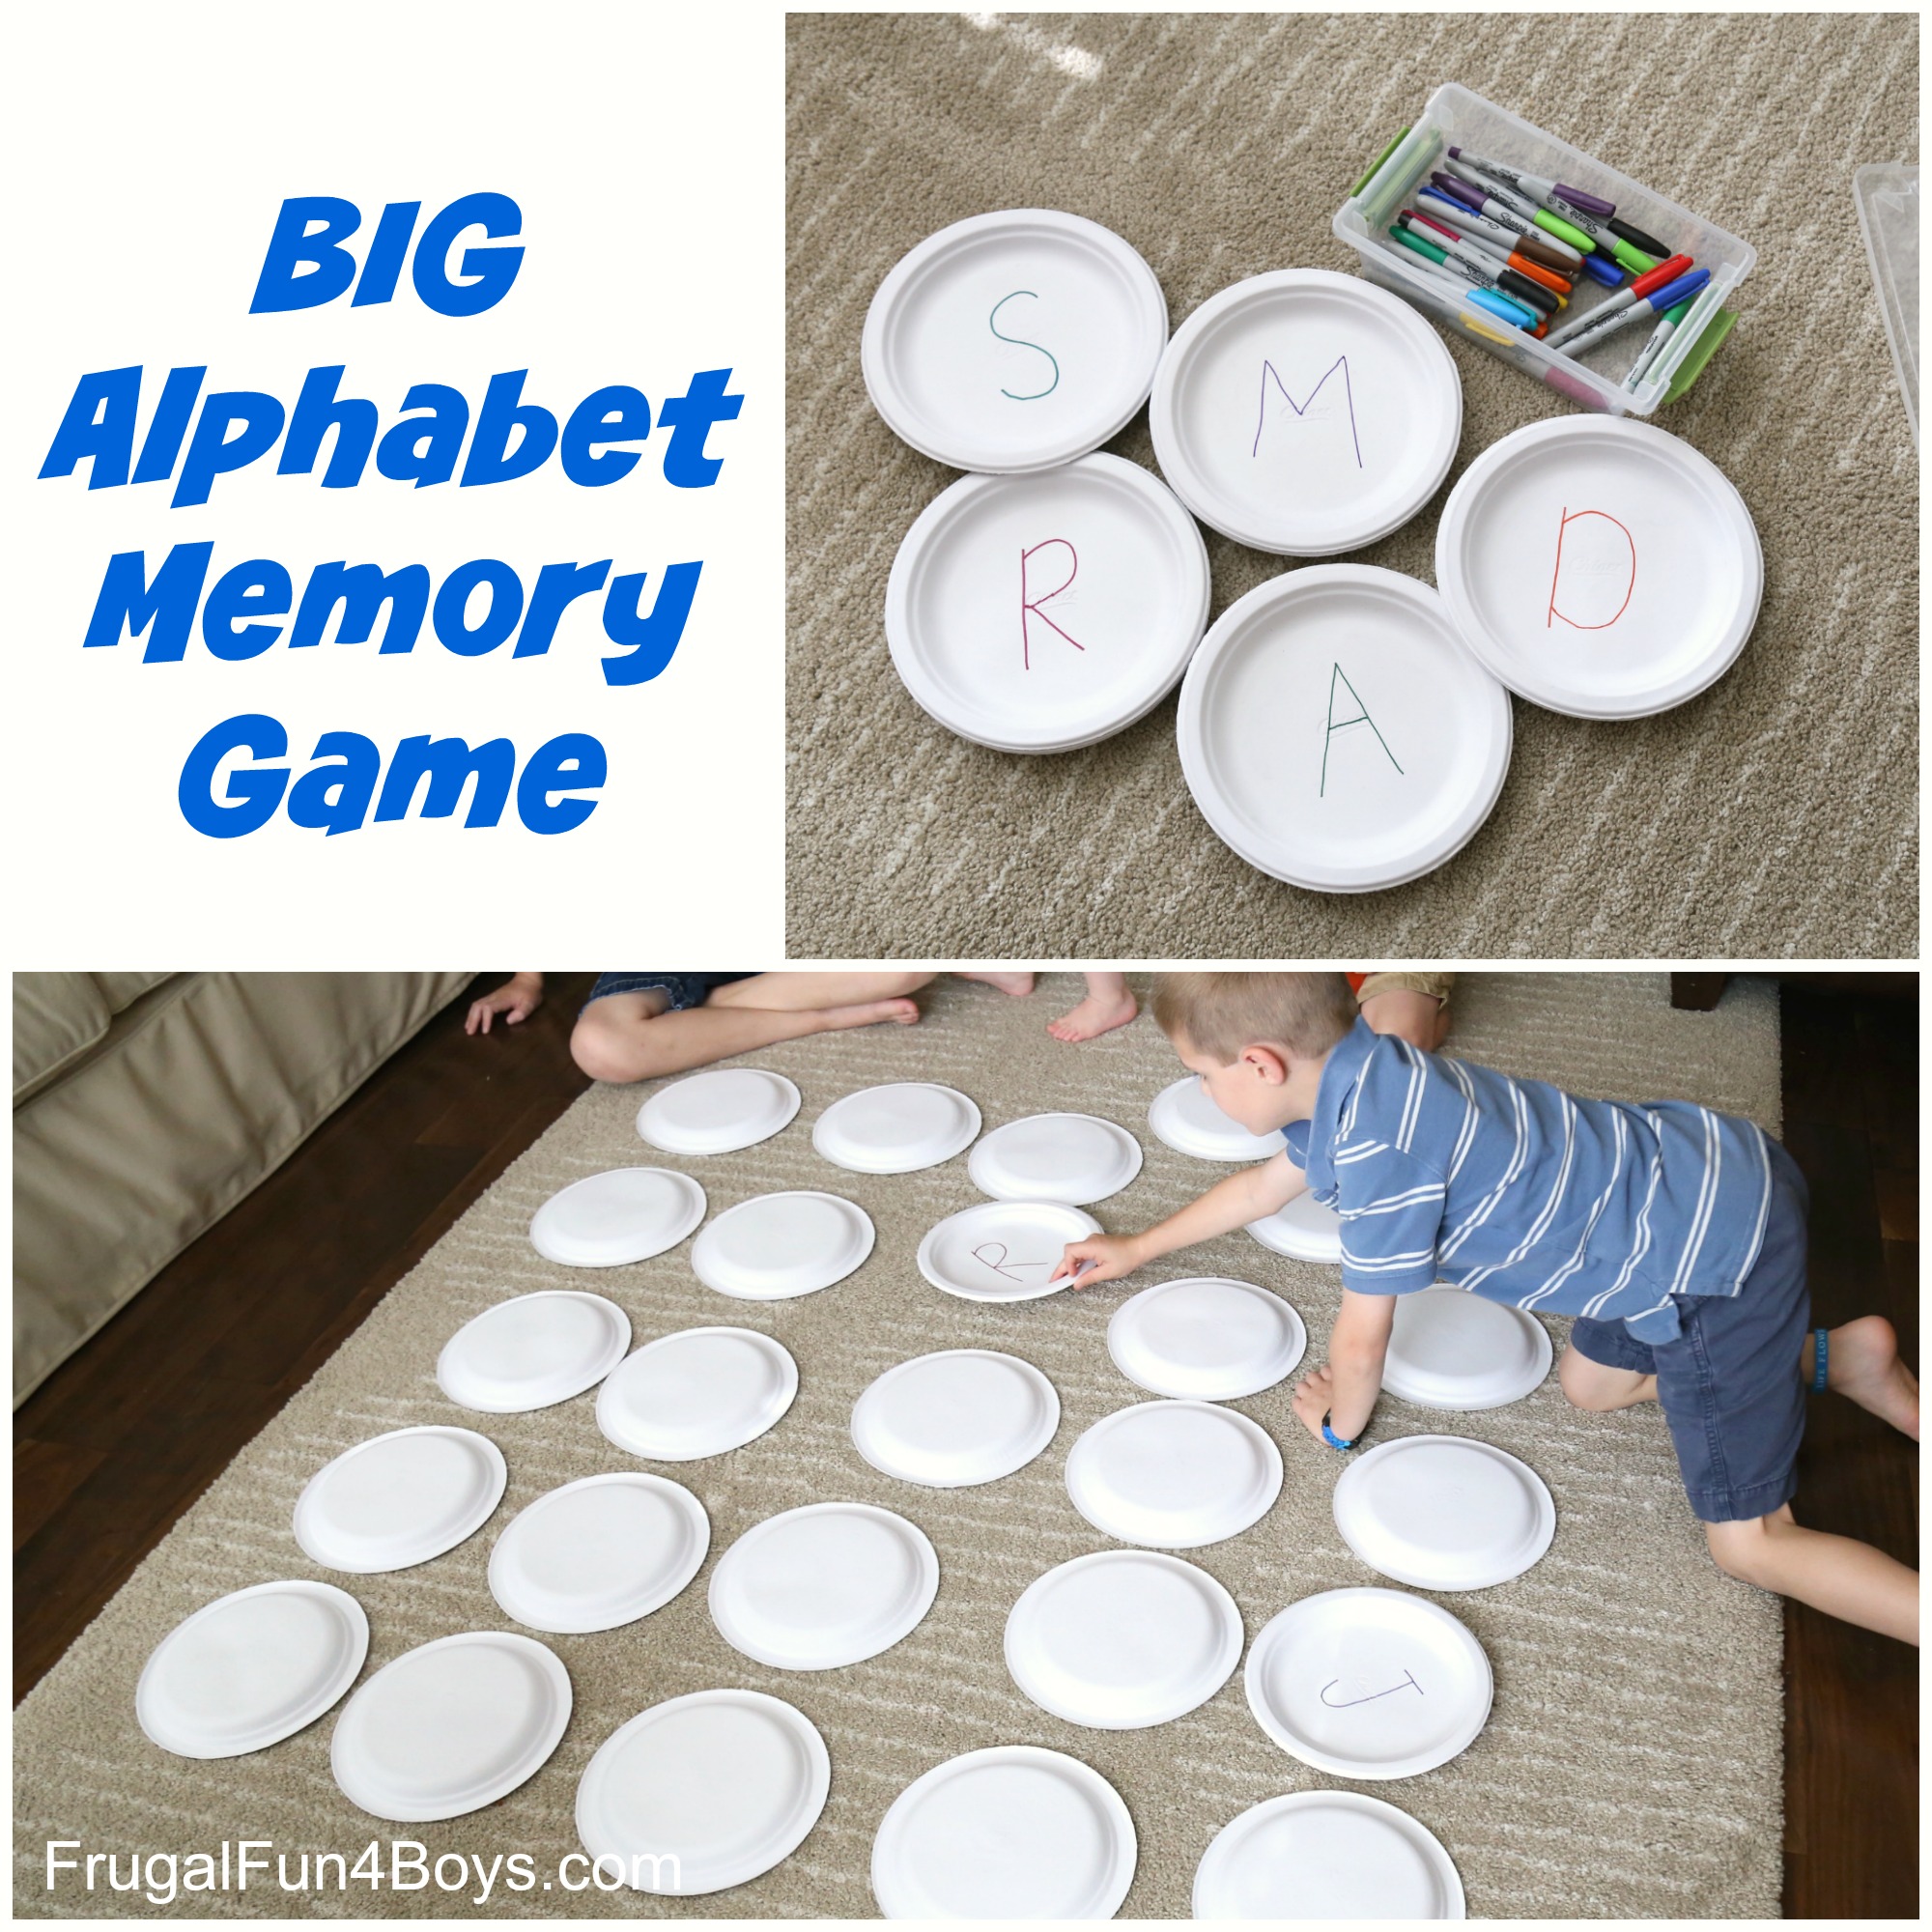 BIG Alphabet Memory Game - Learning Game for Preschoolers